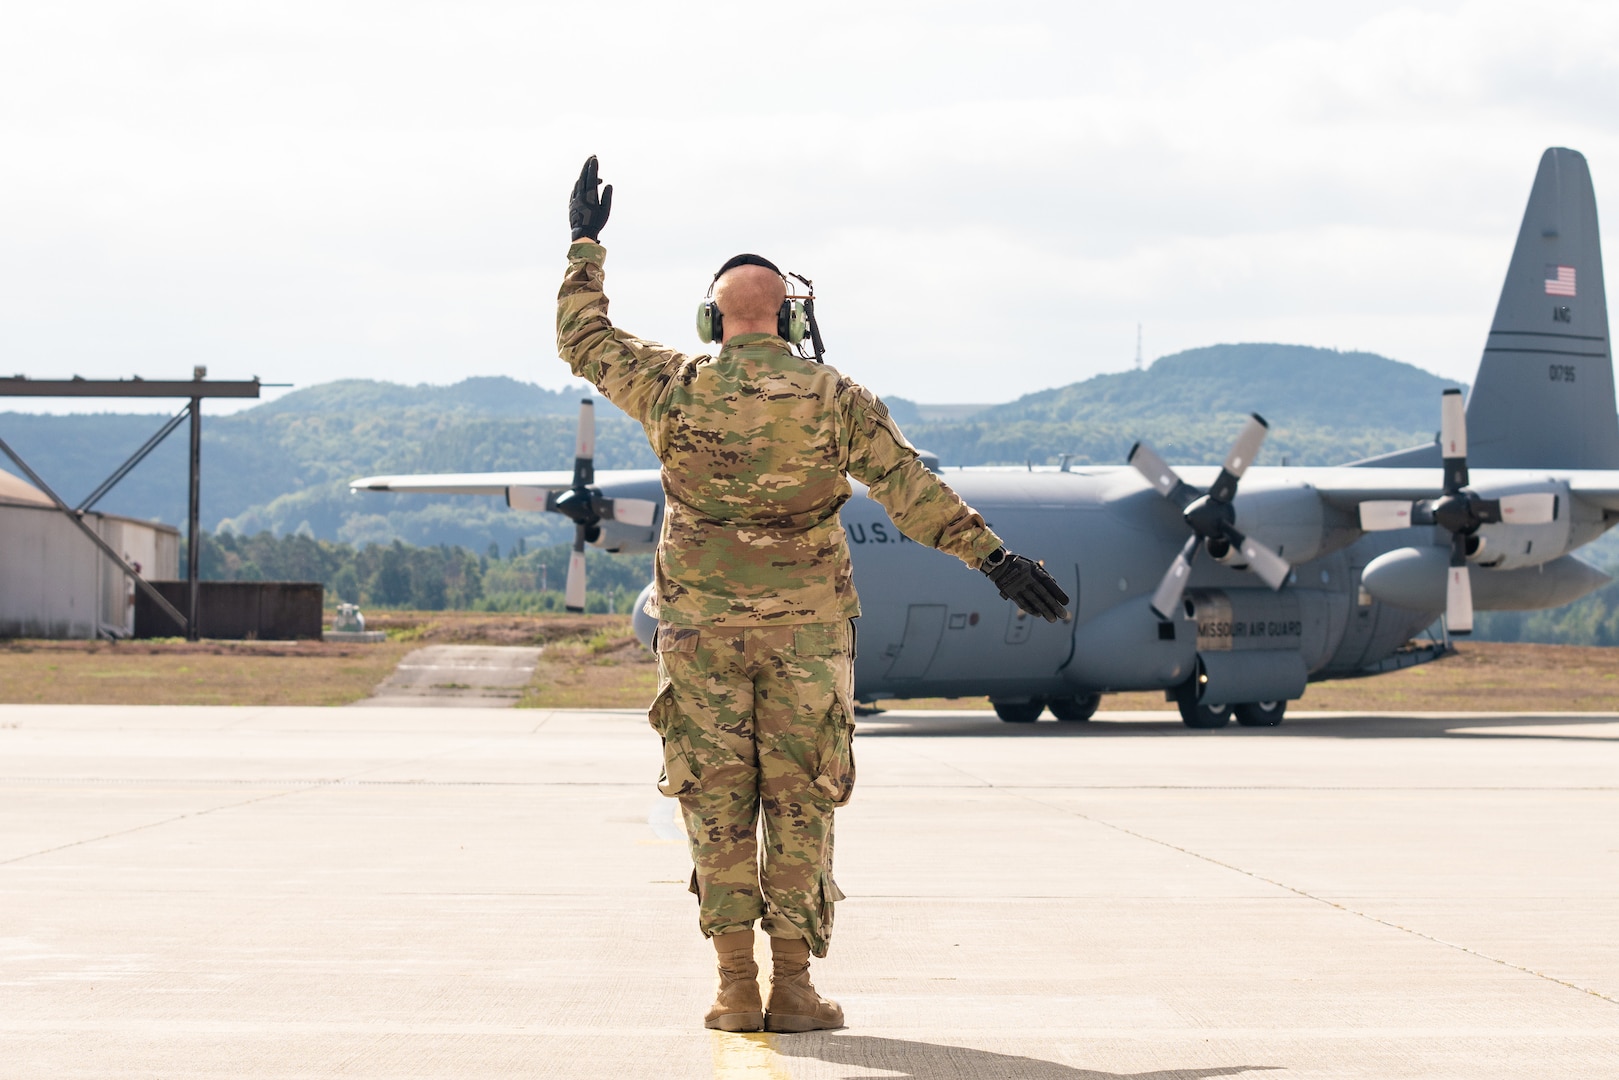 U.S. Air Force Tech. Sgt. Jonathan Jones, with the 139th Airlift Wing, Missouri Air National Guard, marshals in a C-130H Hercules aircraft during Saber Junction 19 at Ramstein Air Base, Germany, Sep. 17, 2019. SJ19 is an exercise involving 16 allies and partner nations at the U.S. Army’s Grafenwoehr and Hohenfels Training Areas, Sept. 3-30.